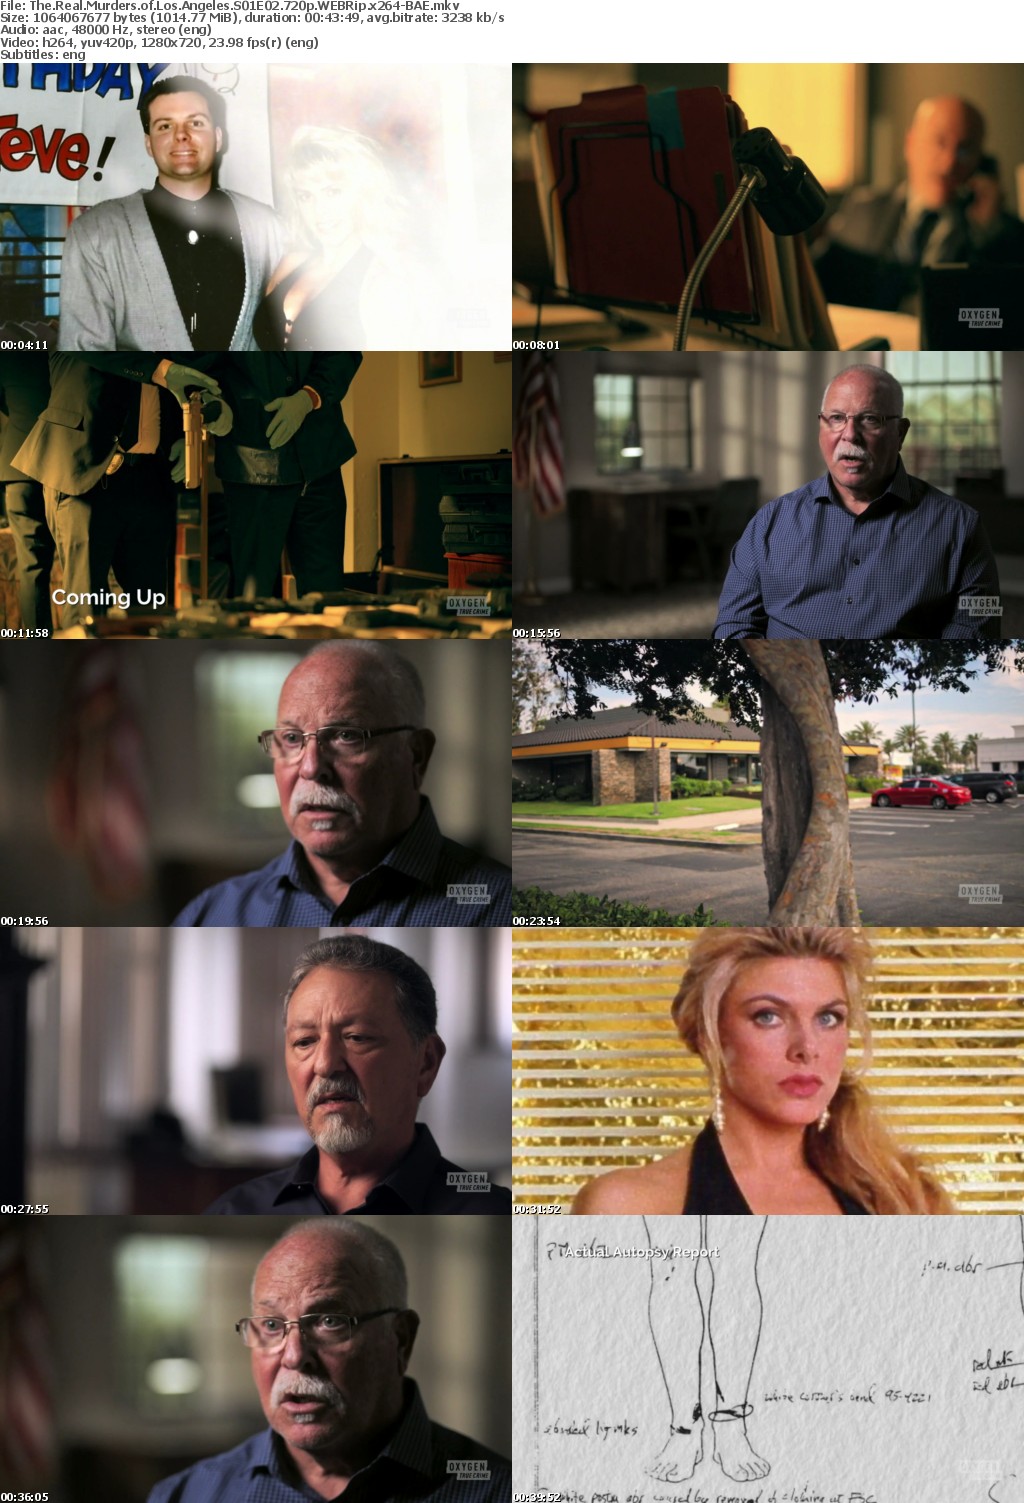 The Real Murders of Los Angeles S01E02 720p WEBRip x264-BAE